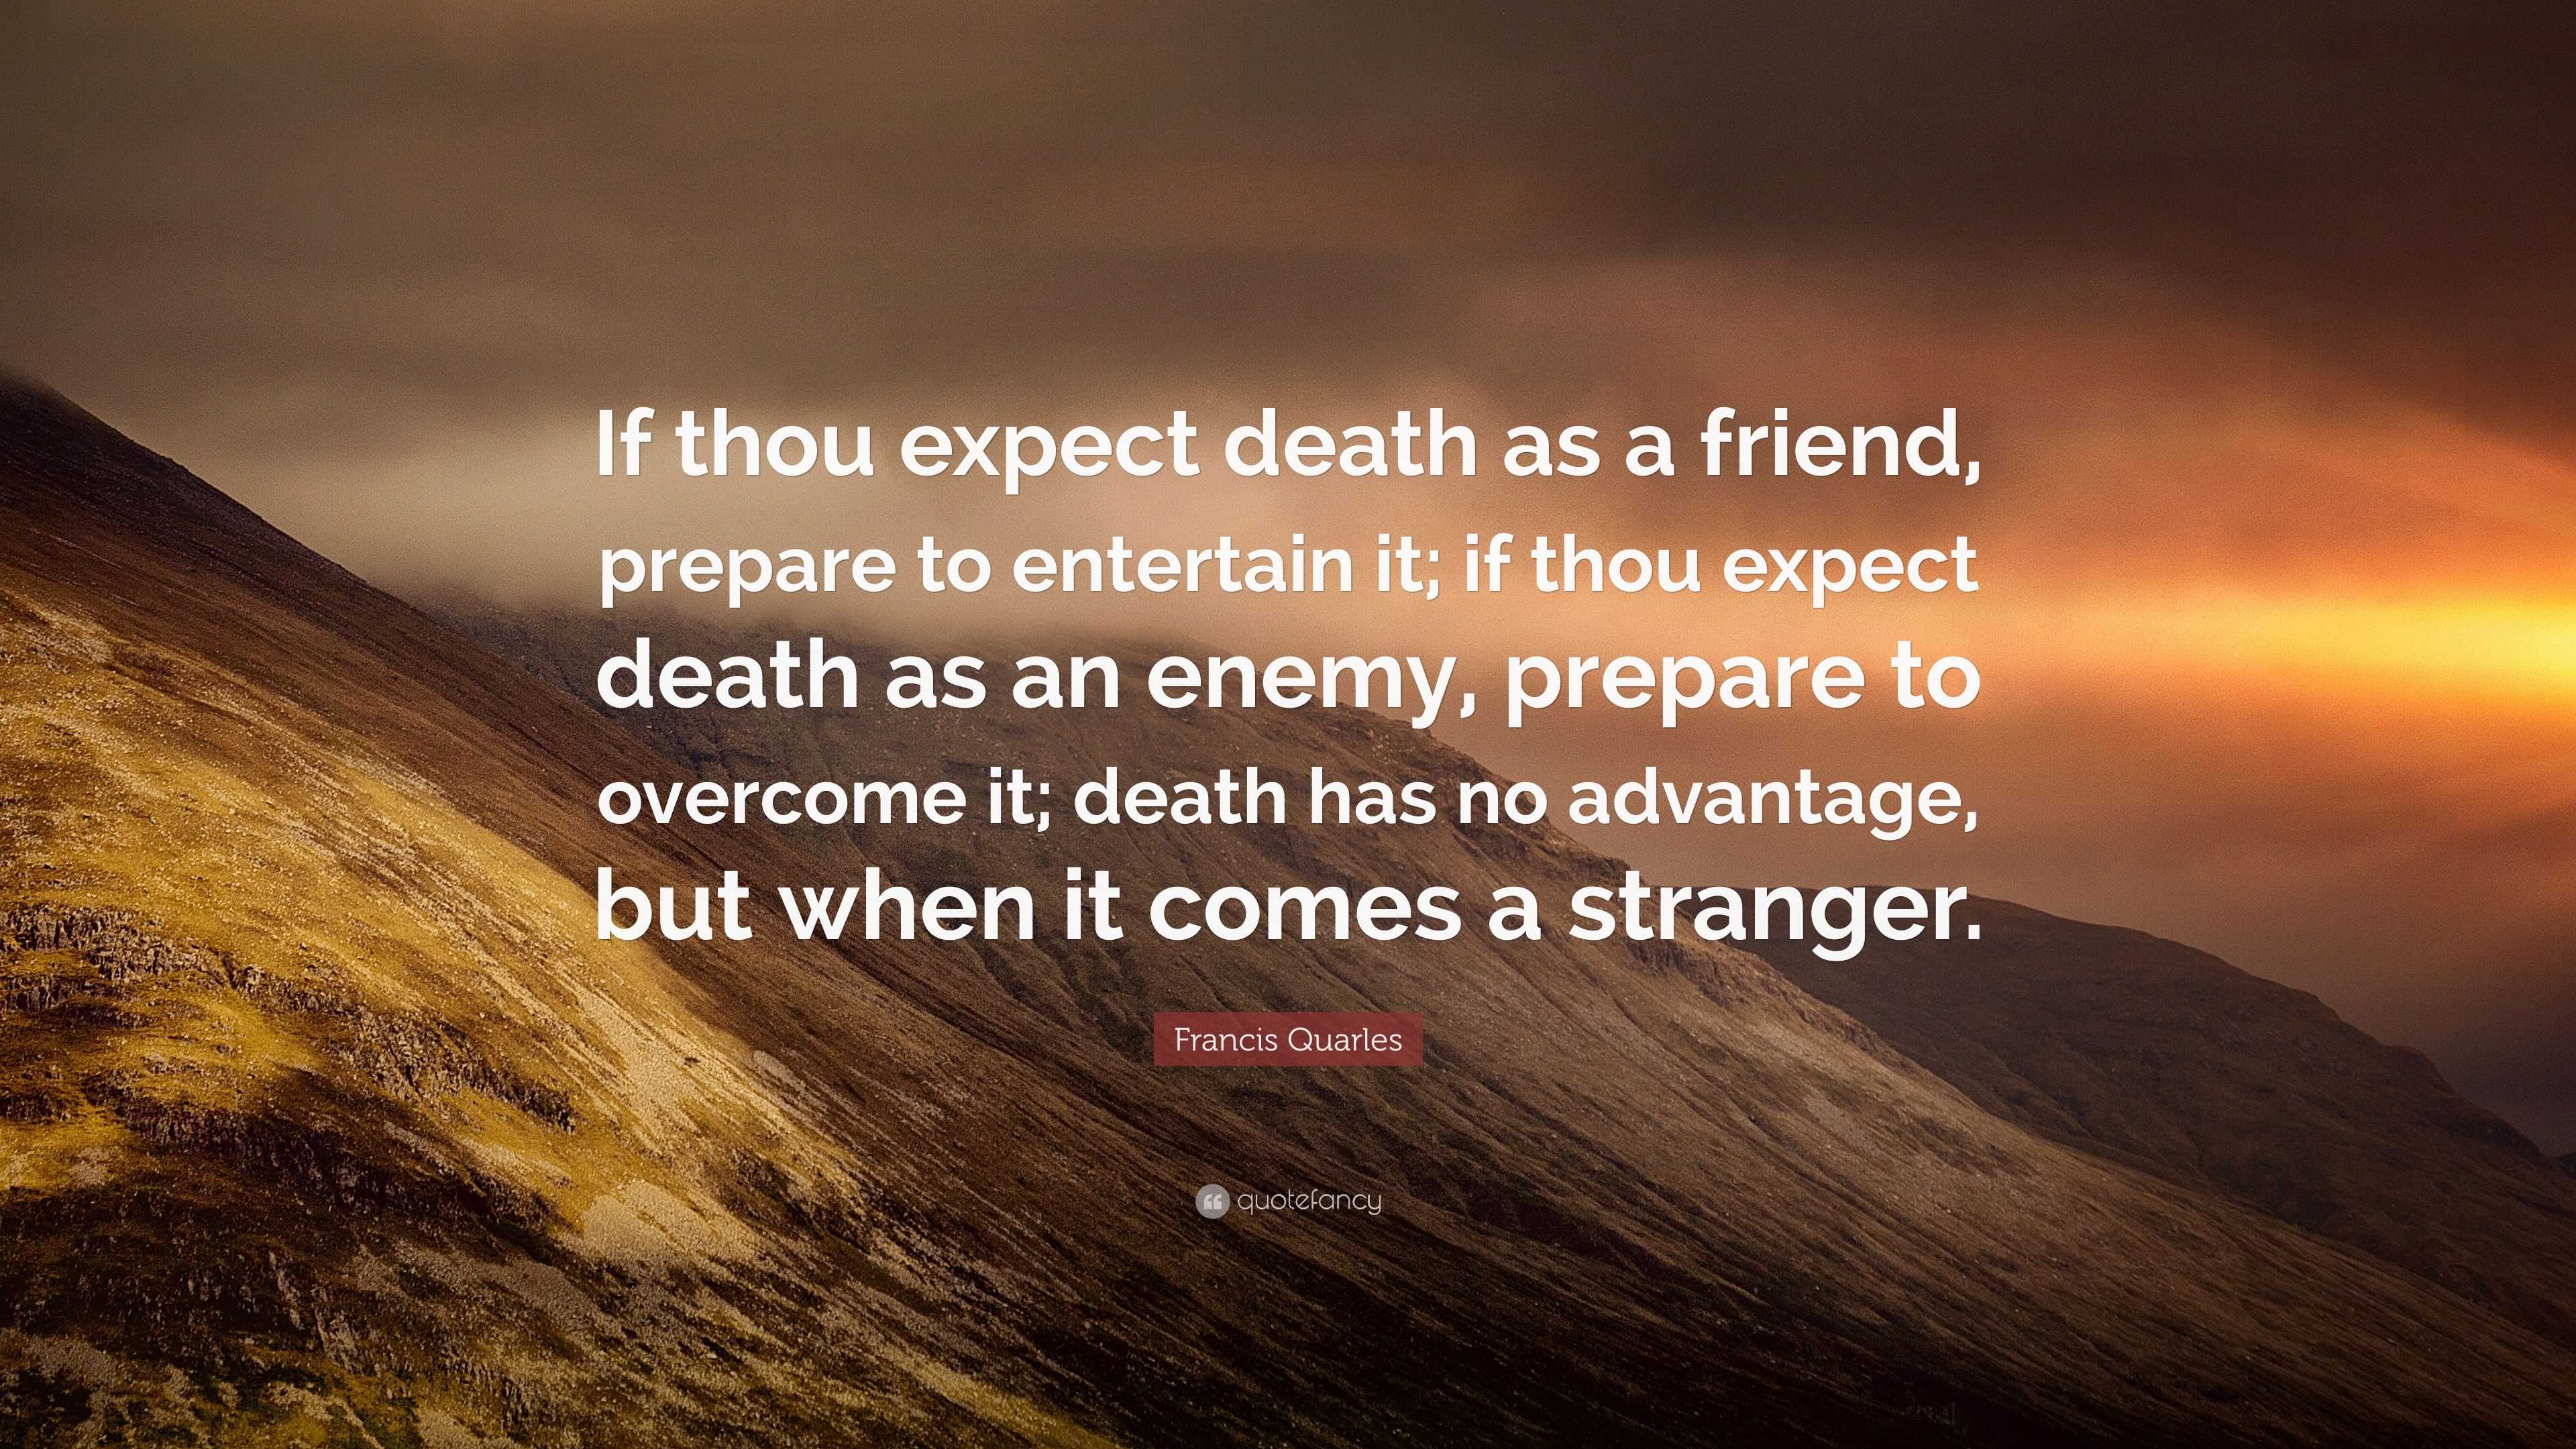 Francis Quarles Quote: “If thou expect death as a friend, prepare to ...